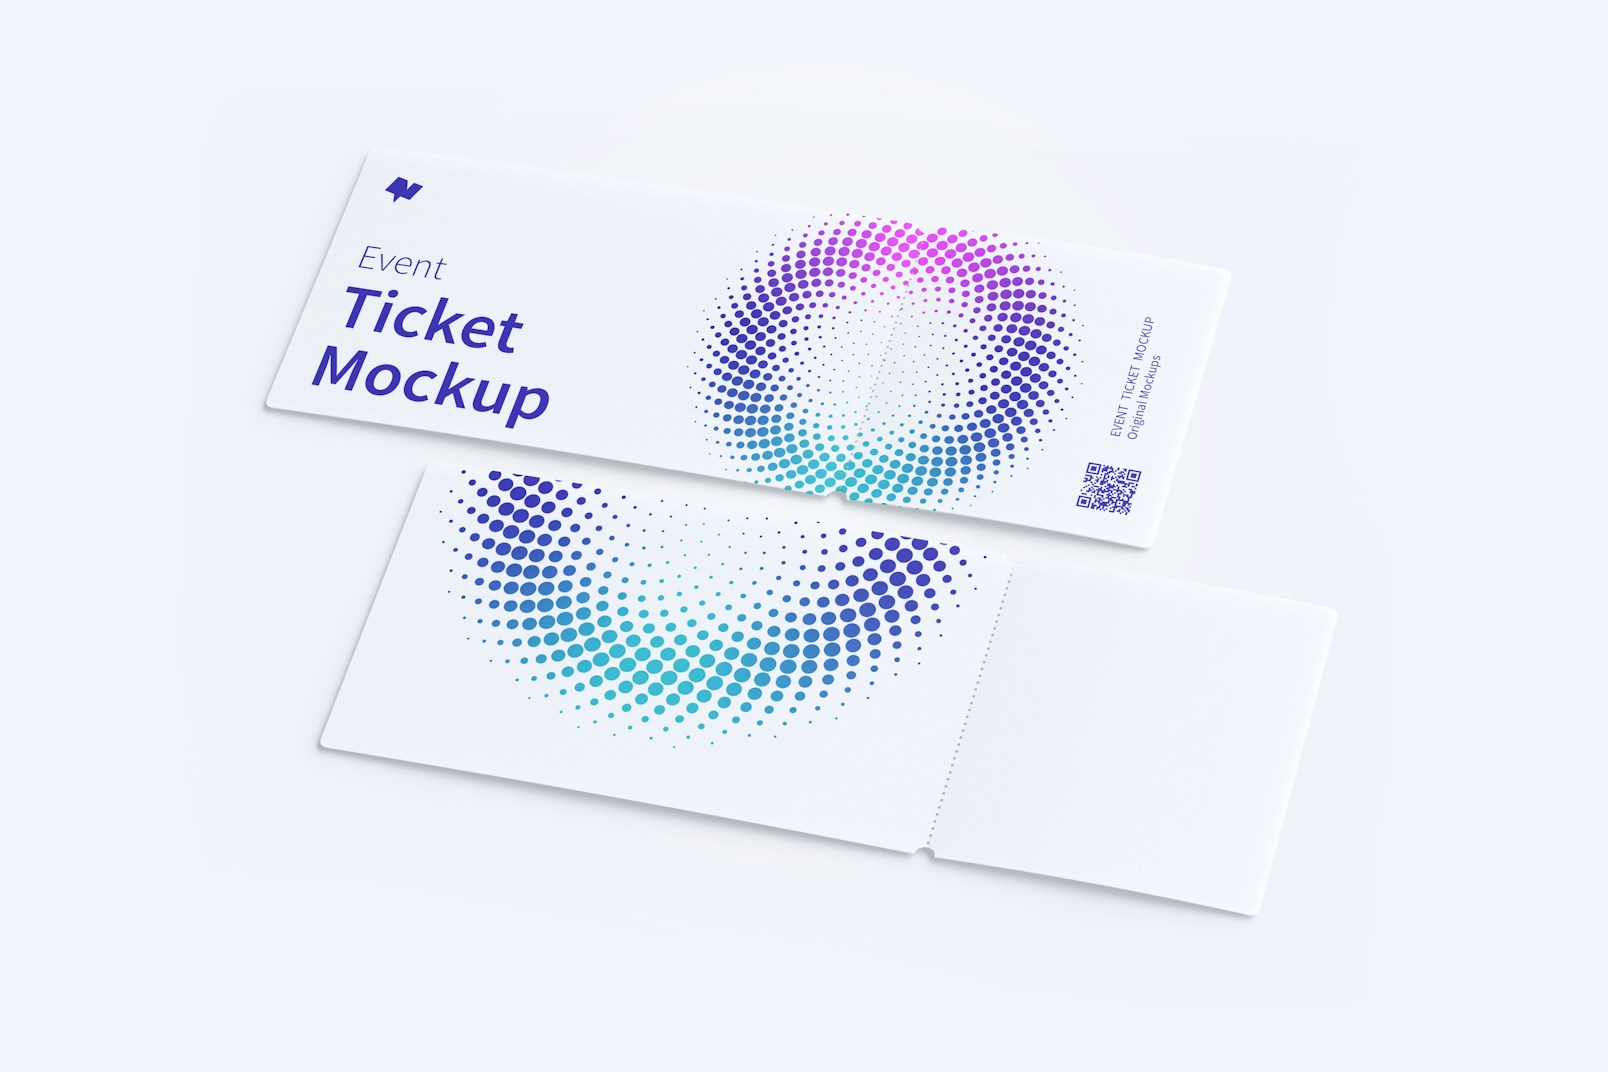 Event Tickets Mockup 01